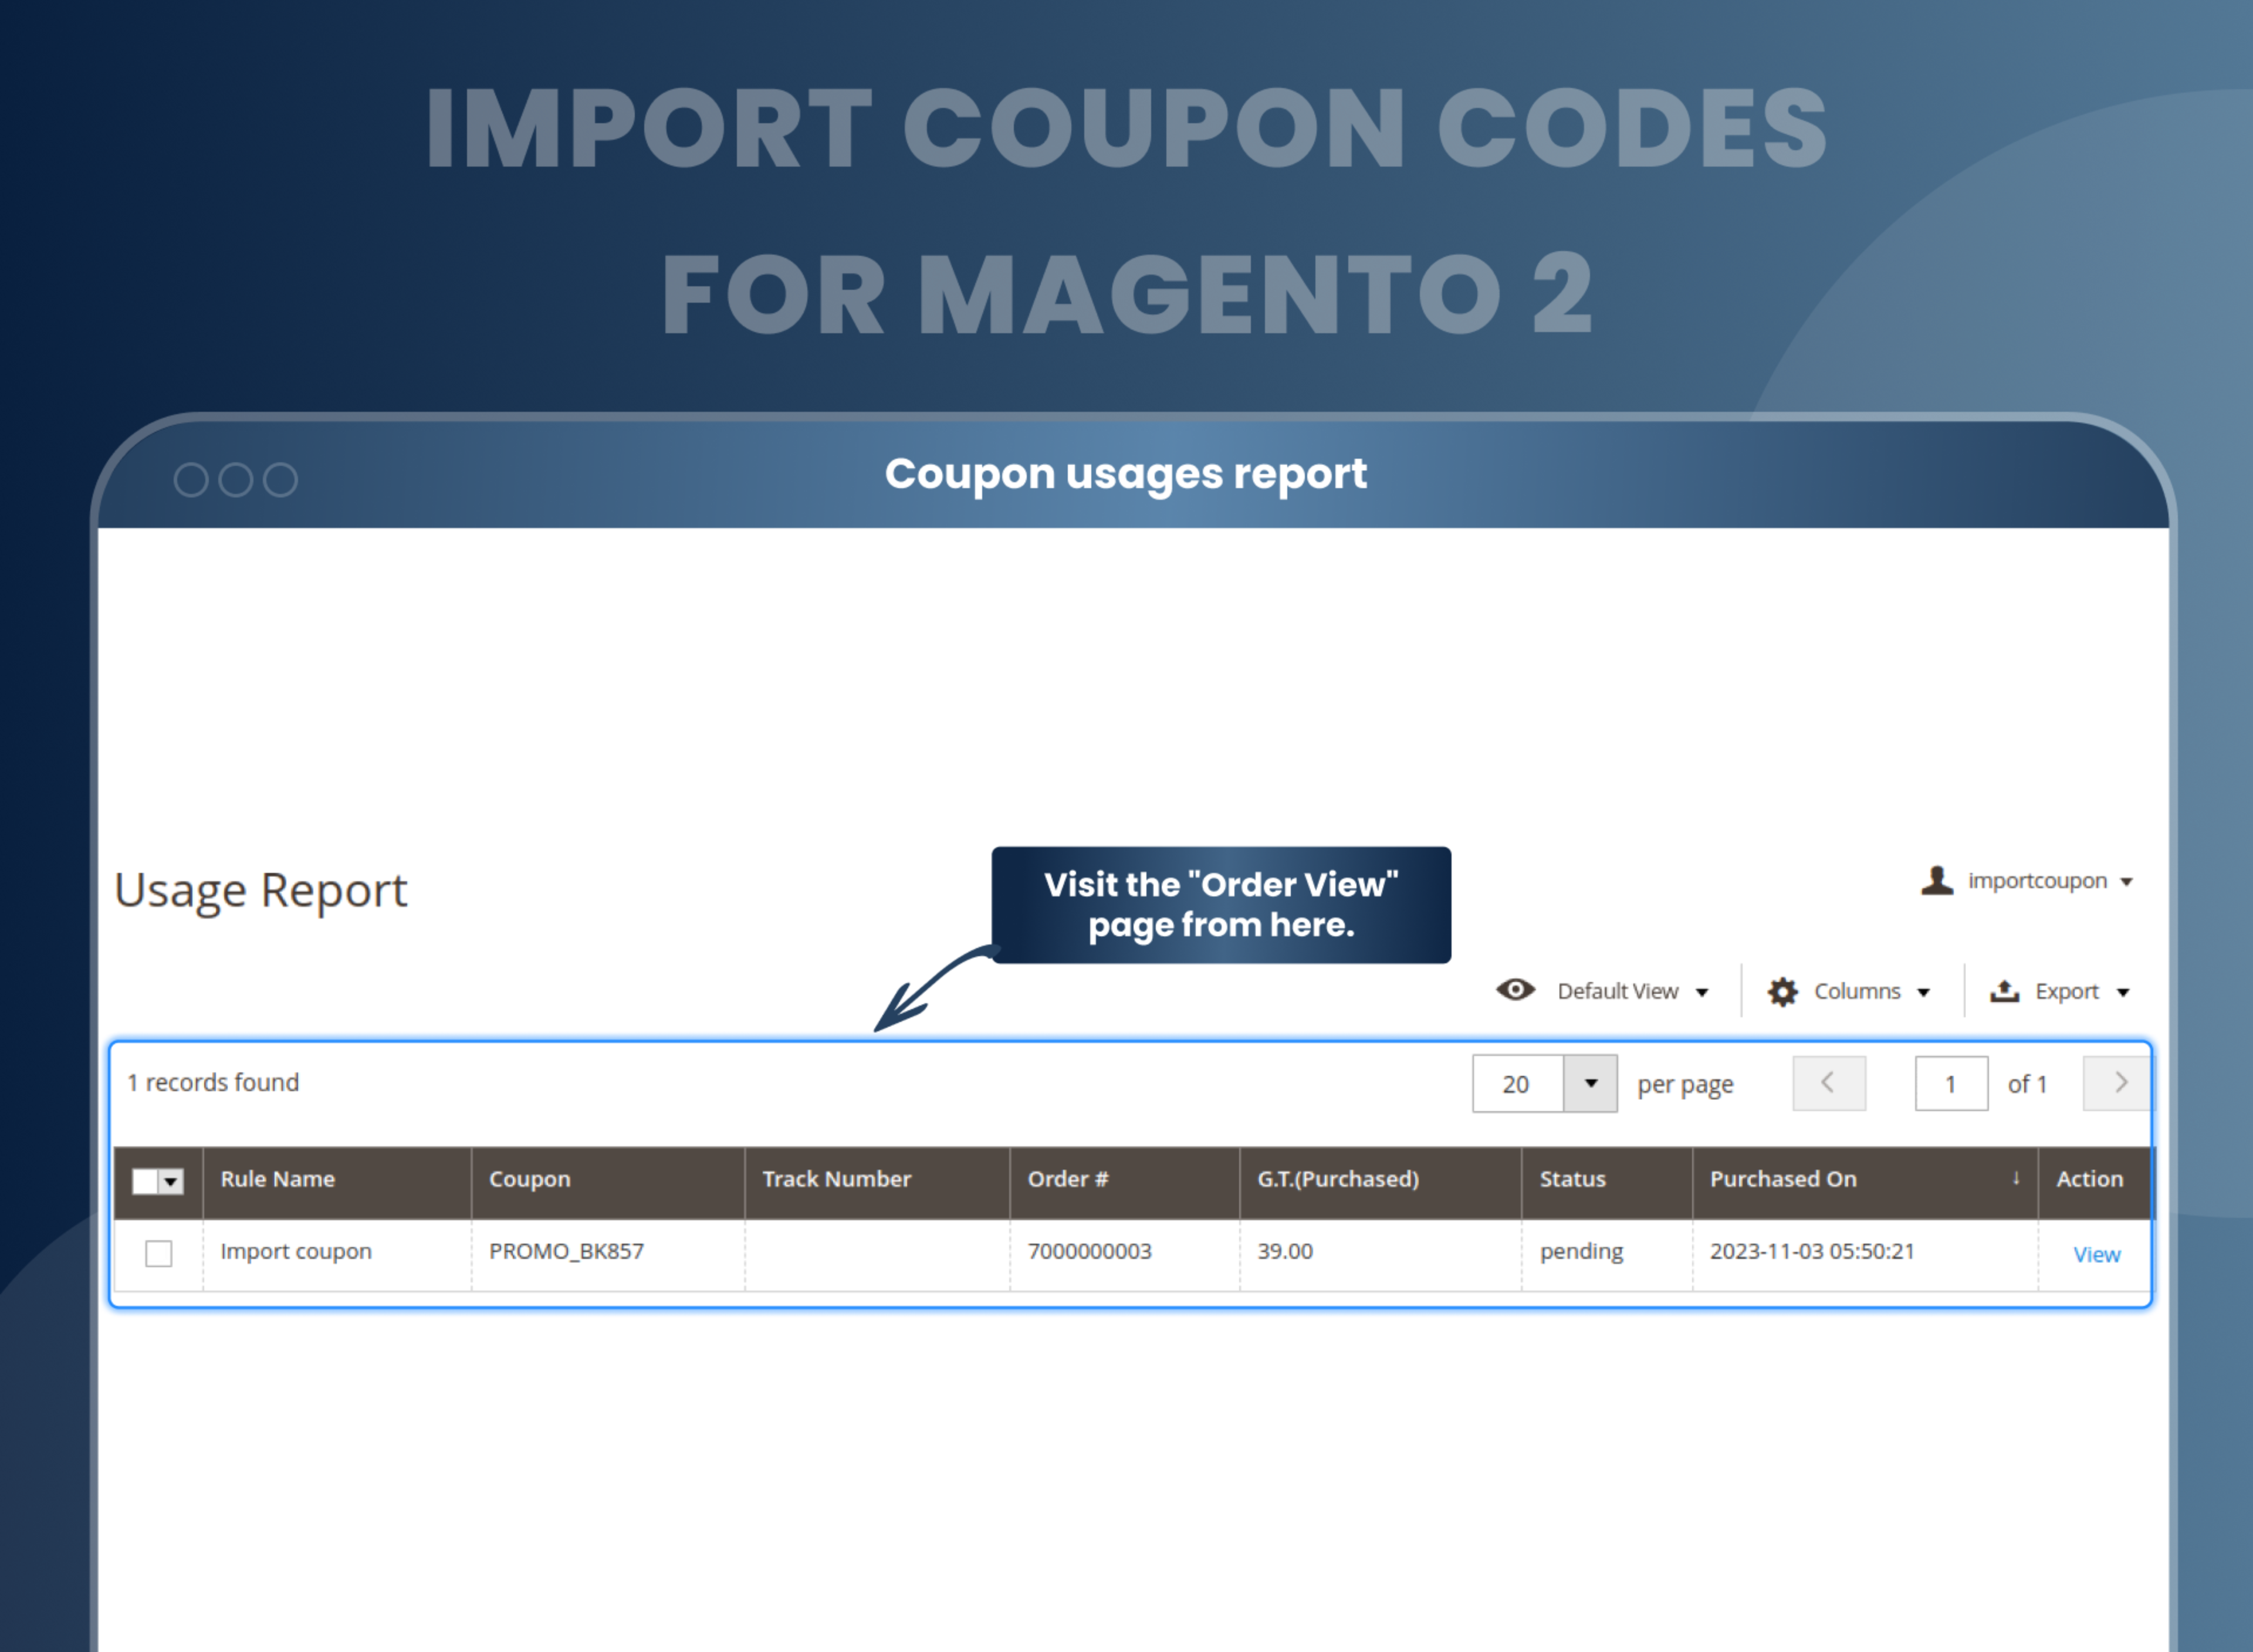 Coupon usages report